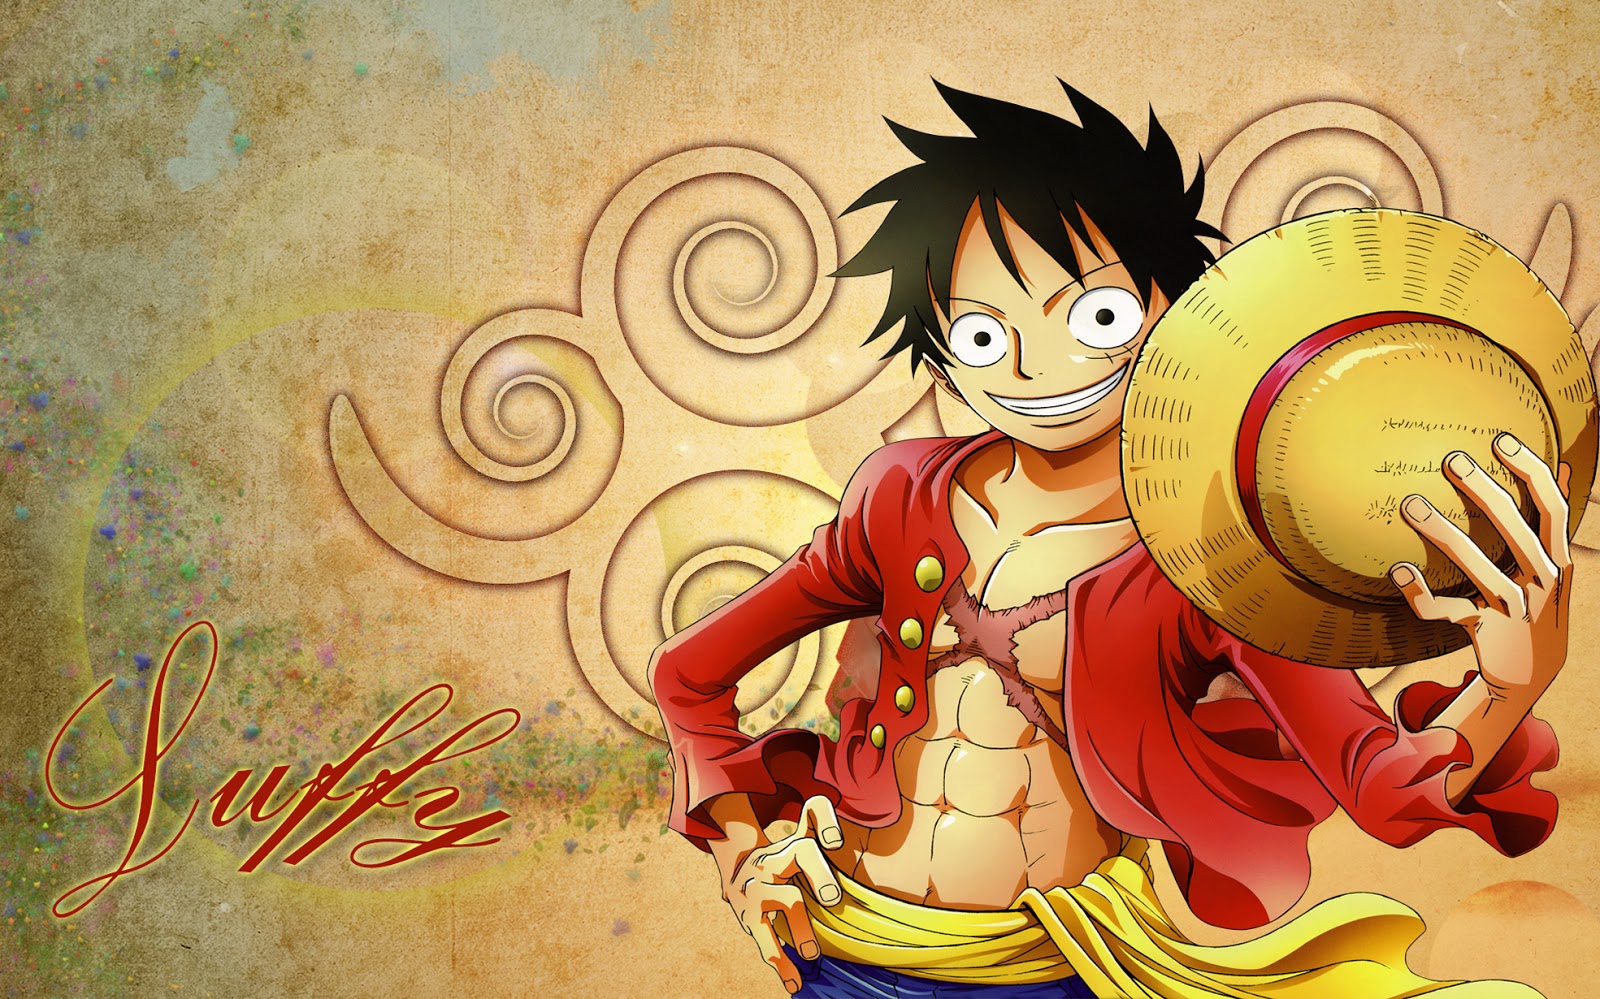 Onepiece Image: One Piece Luffy Wallpaper V.1#